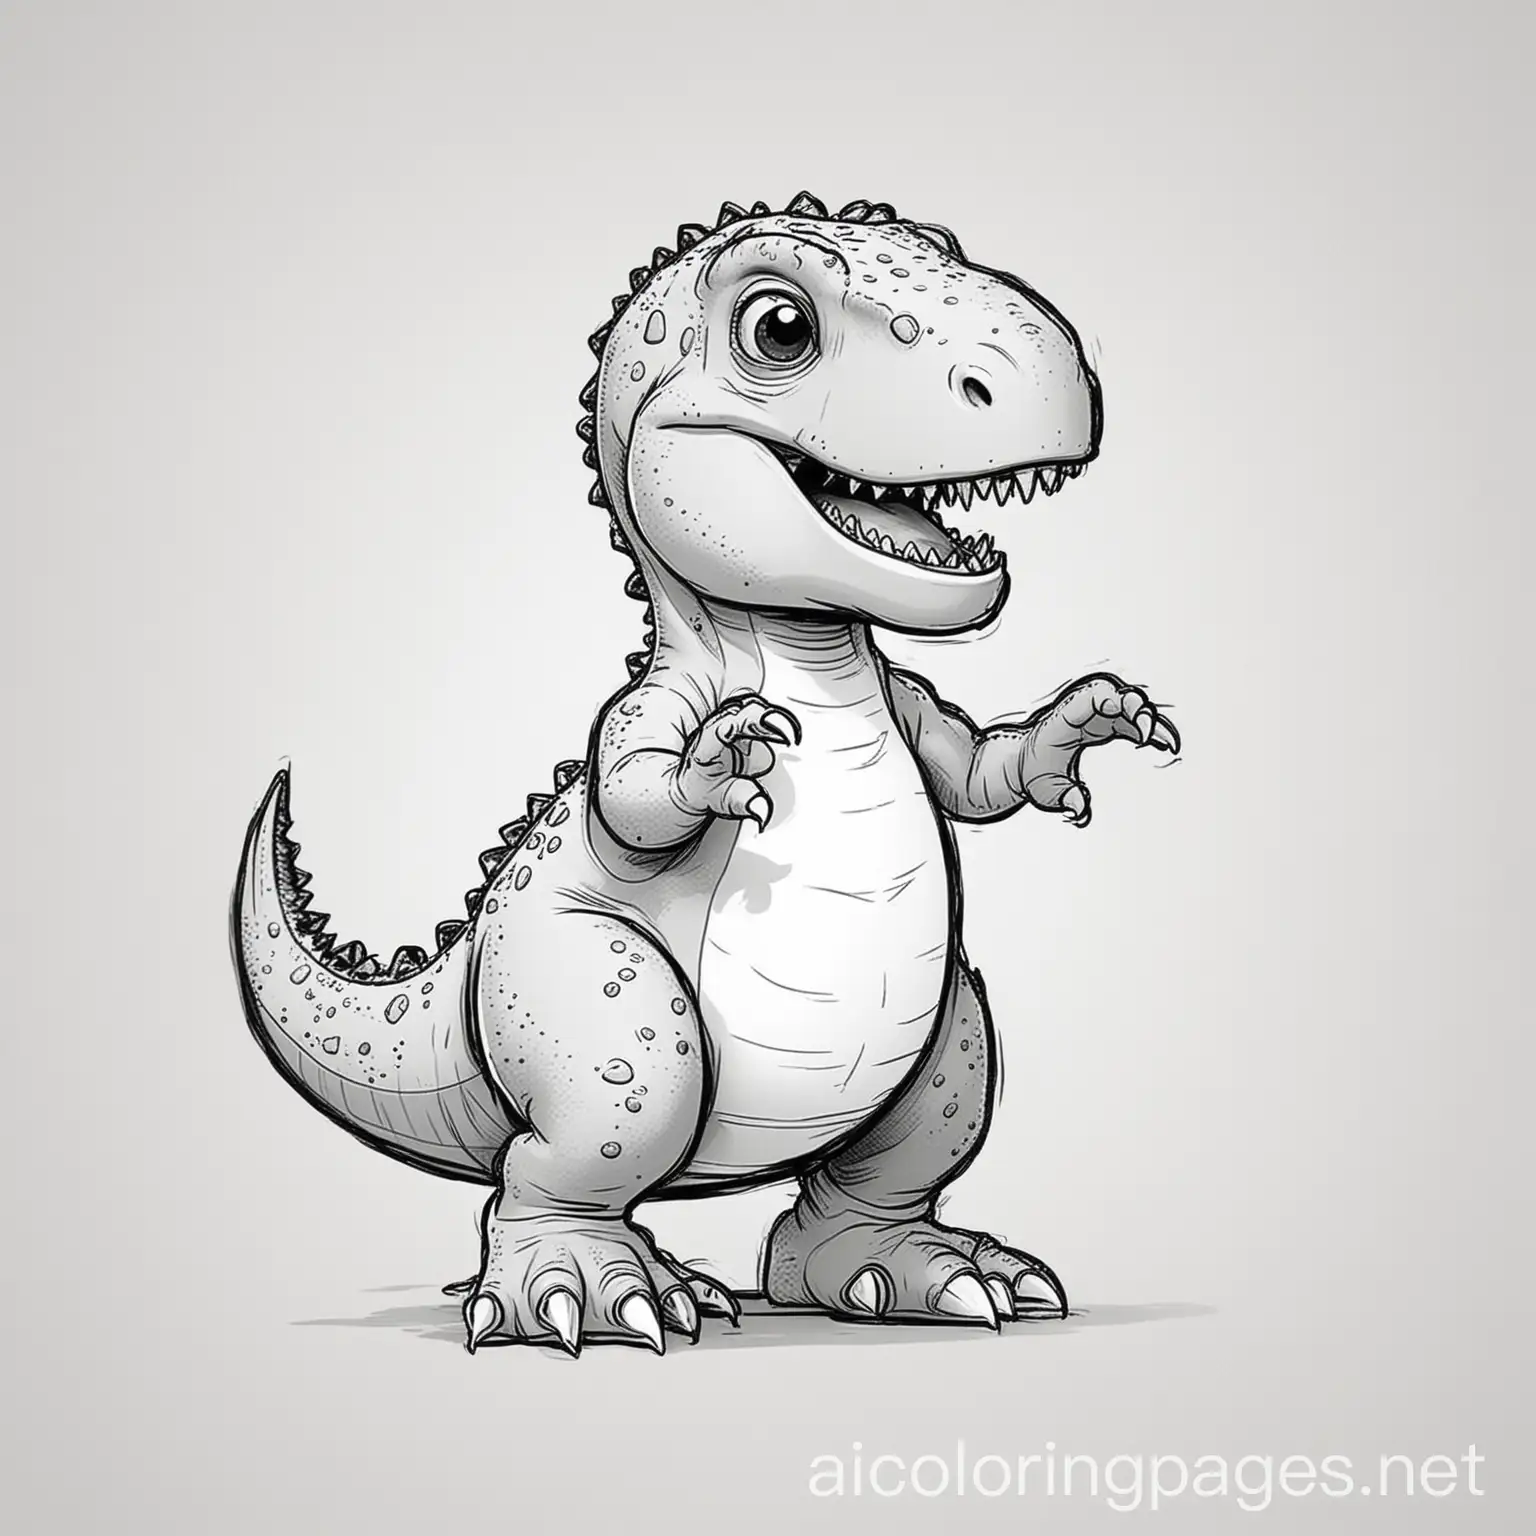 Adorable-Black-and-White-TRex-Coloring-Page-with-Simplicity-and-Ample-White-Space